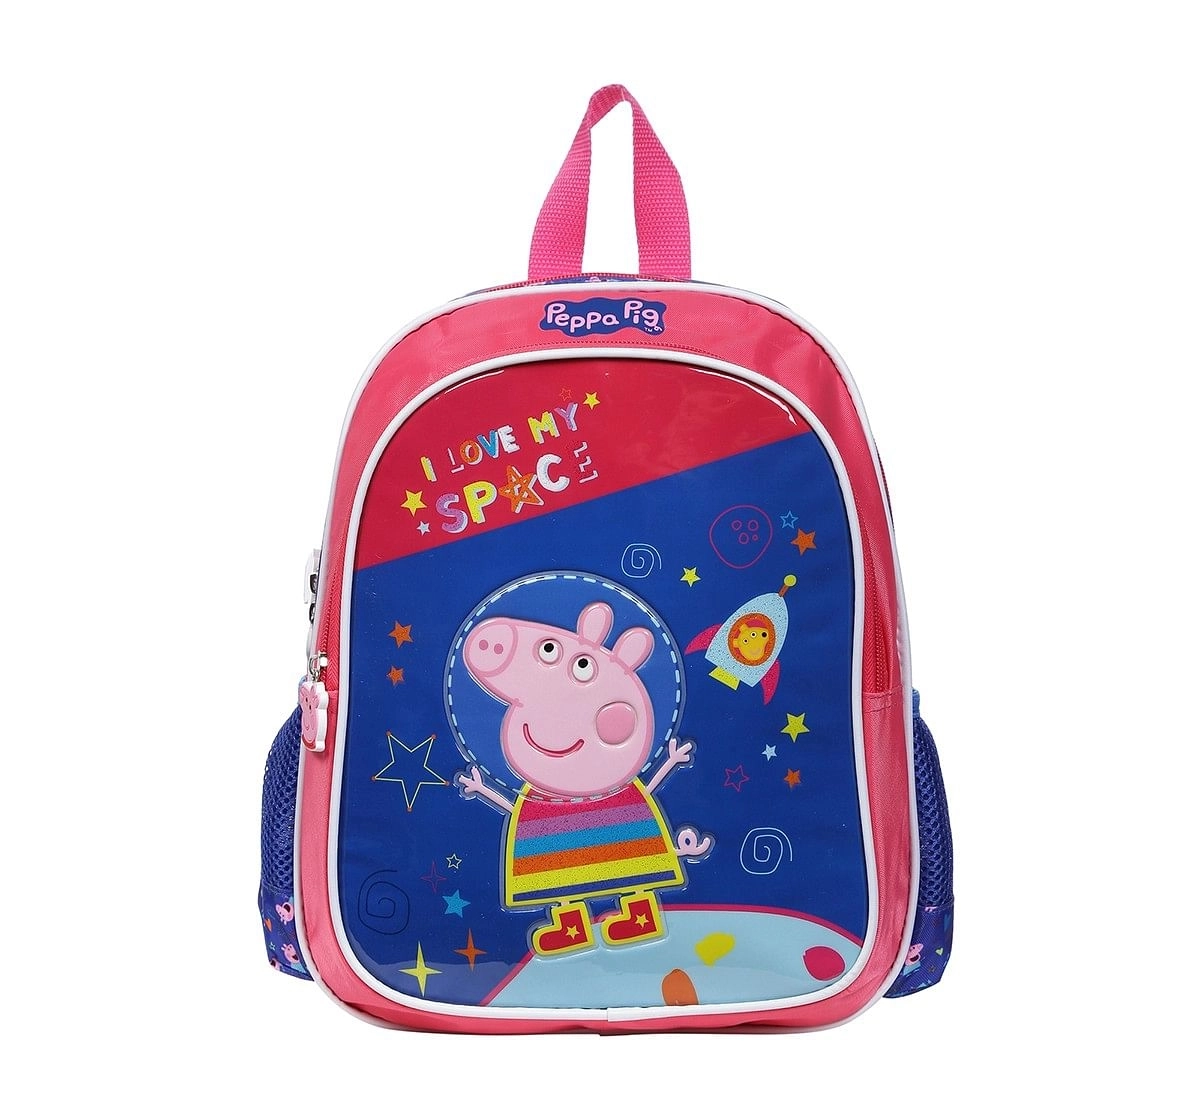  Peppa Pig I Love My Space 12 Backpack Bags for Kids age 3Y+ 